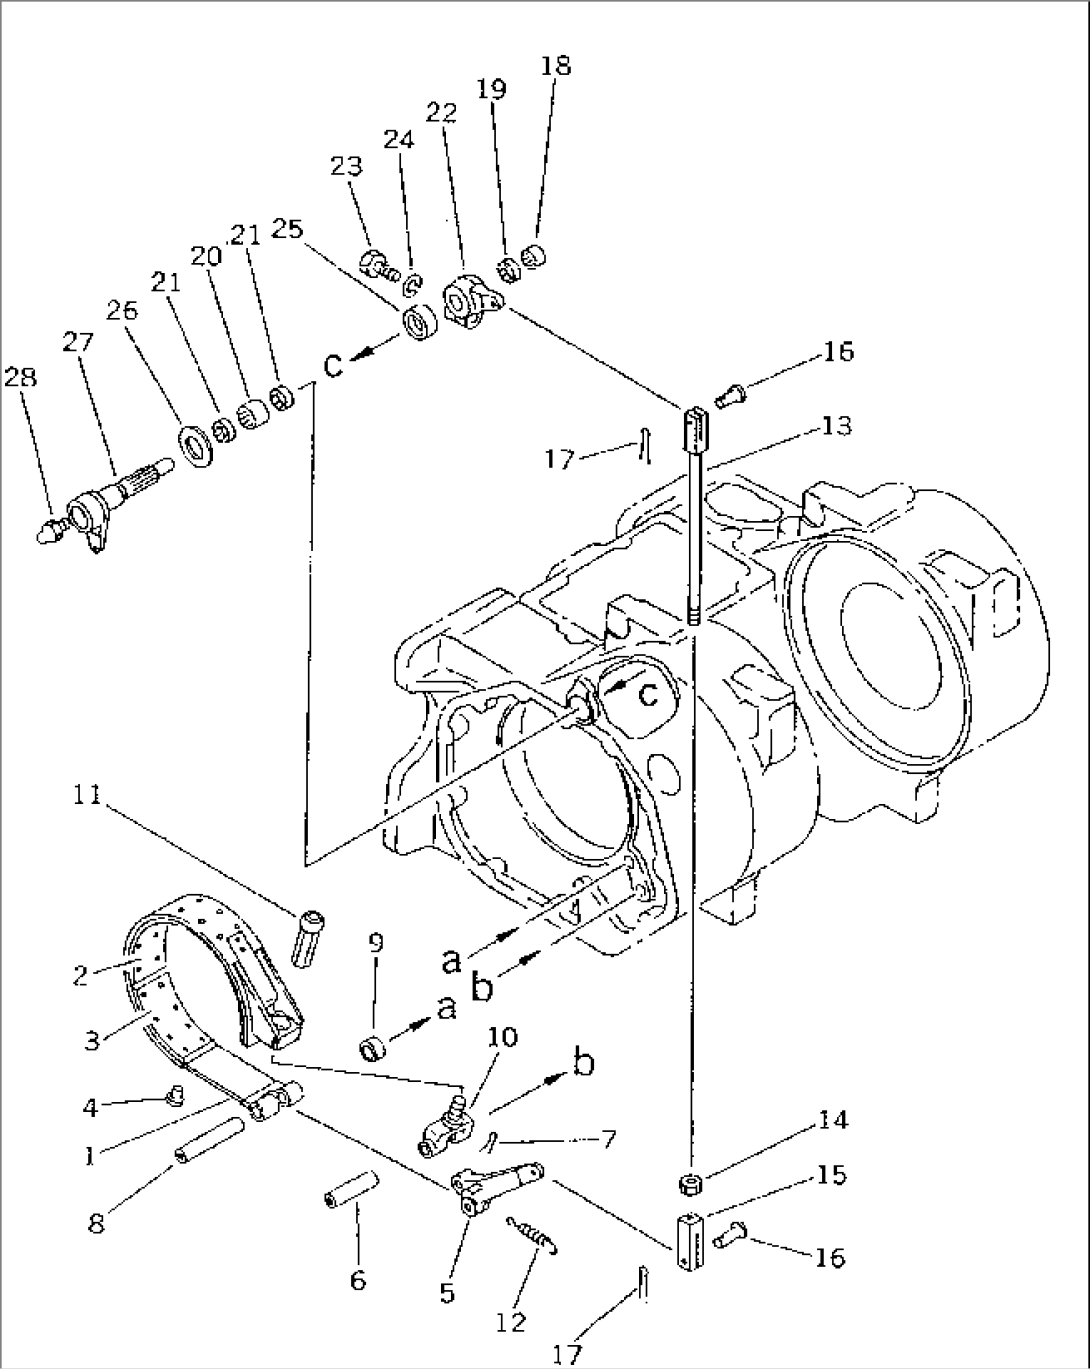 TOWING WINCH (BRAKE BAND AND LINKAGE)